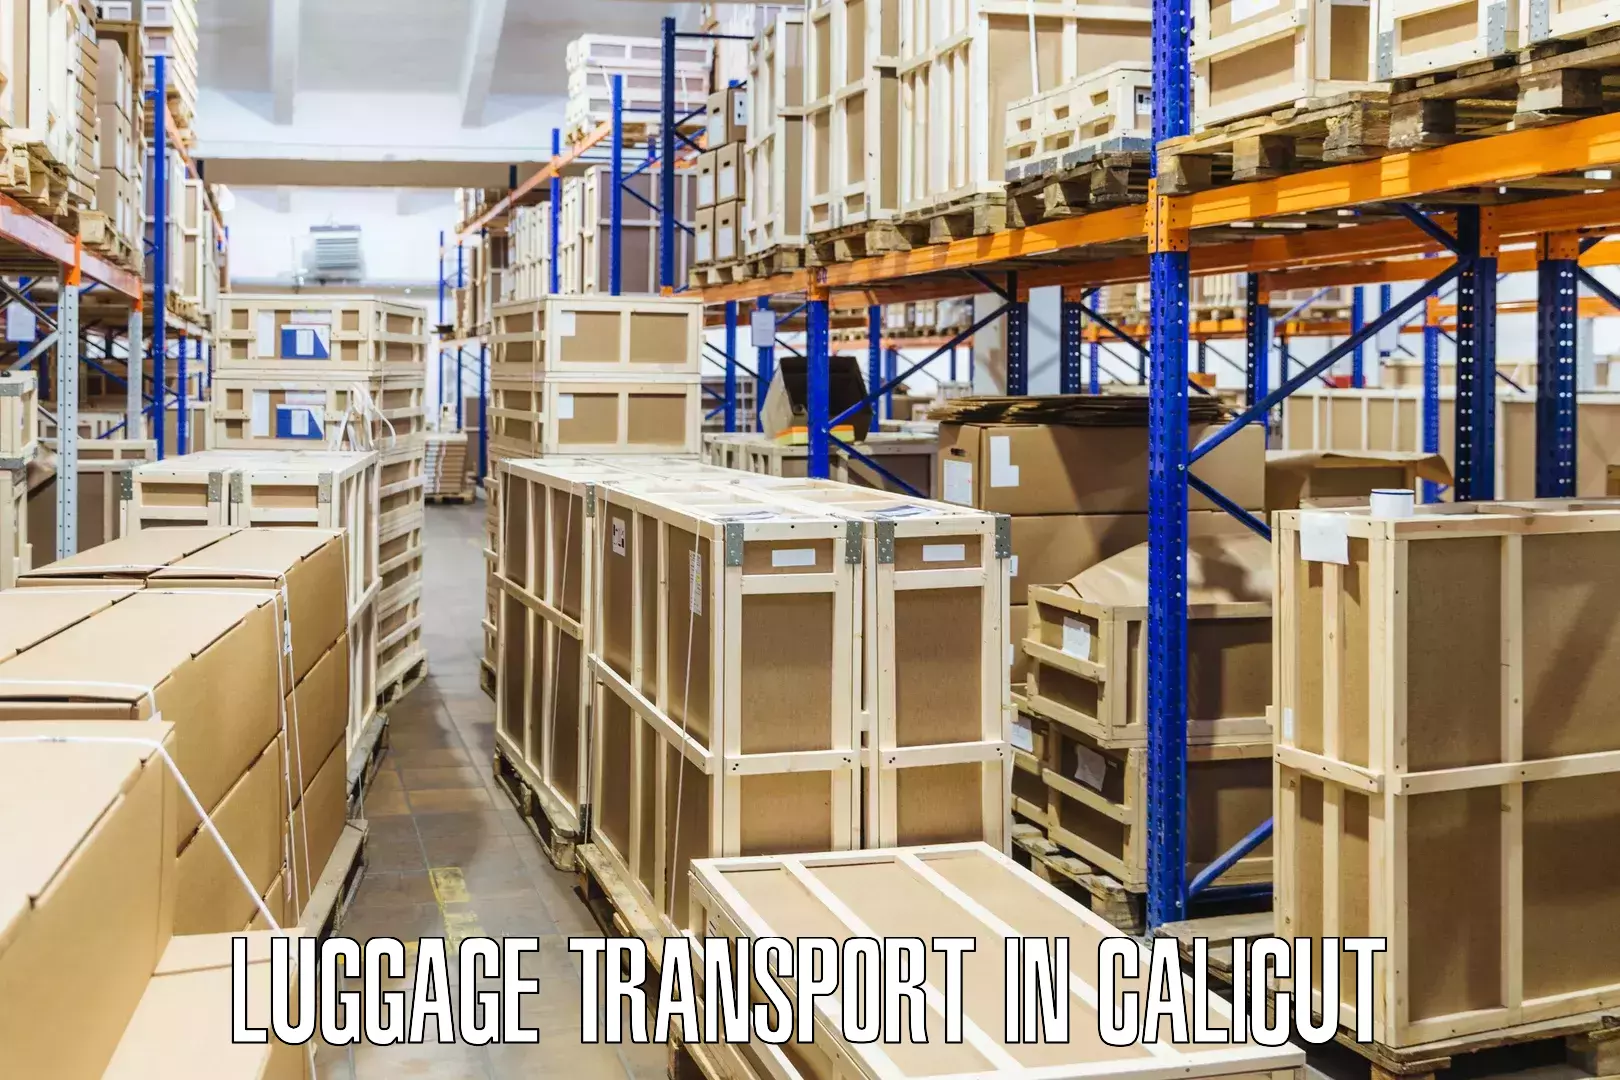 Luggage transport guidelines in Calicut